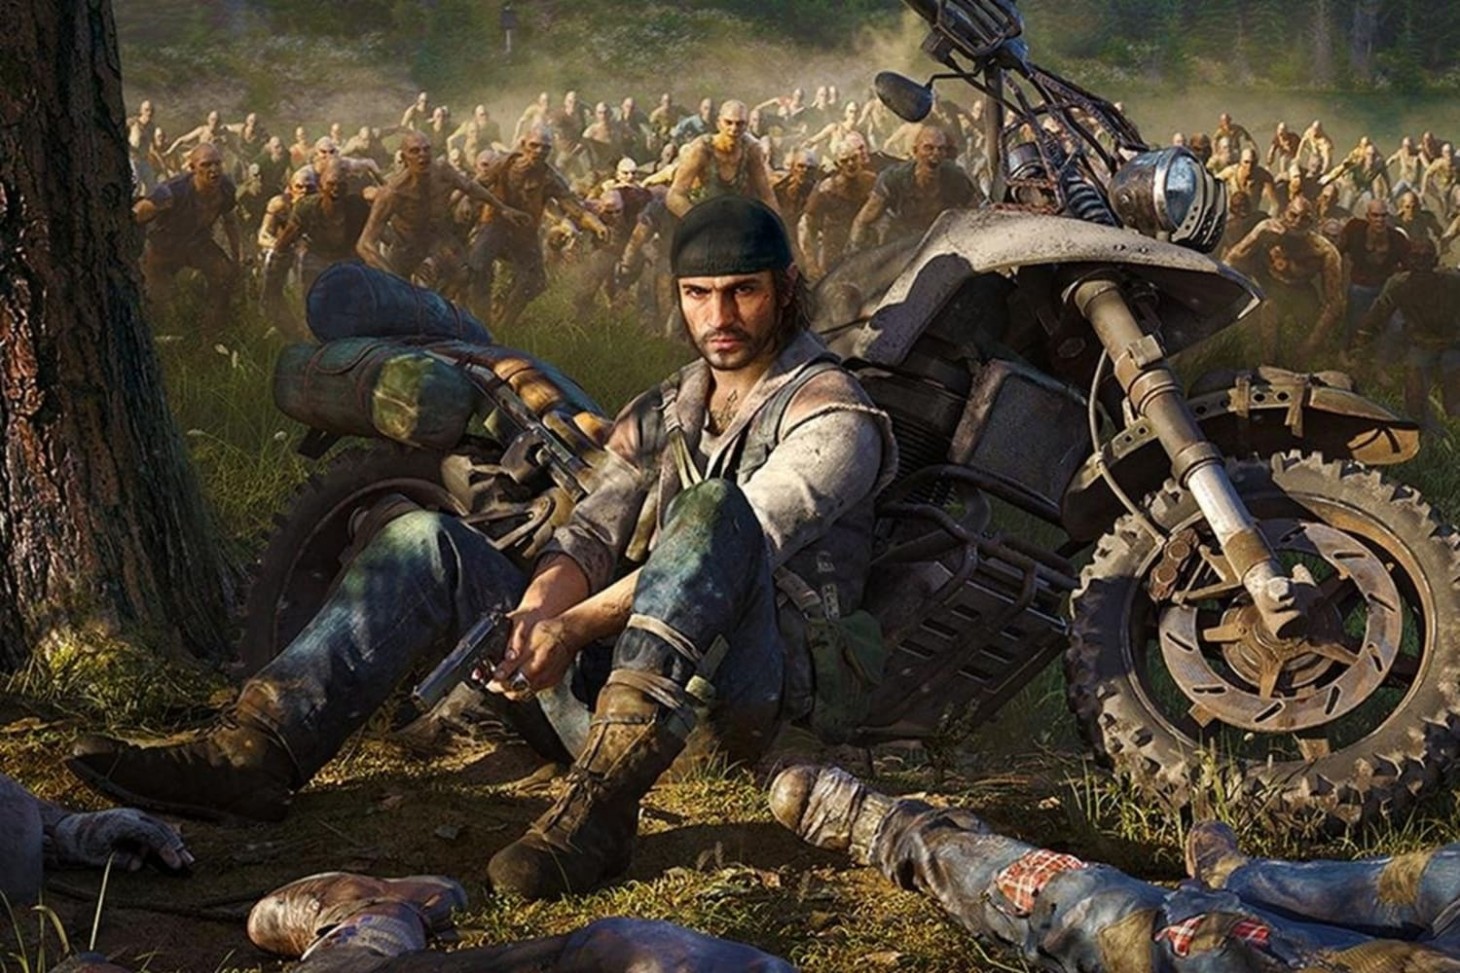 Days Gone 2 Details Revealed By Game's Director, Including A 'Shared  Universe With Co-Op Play' - Game Informer